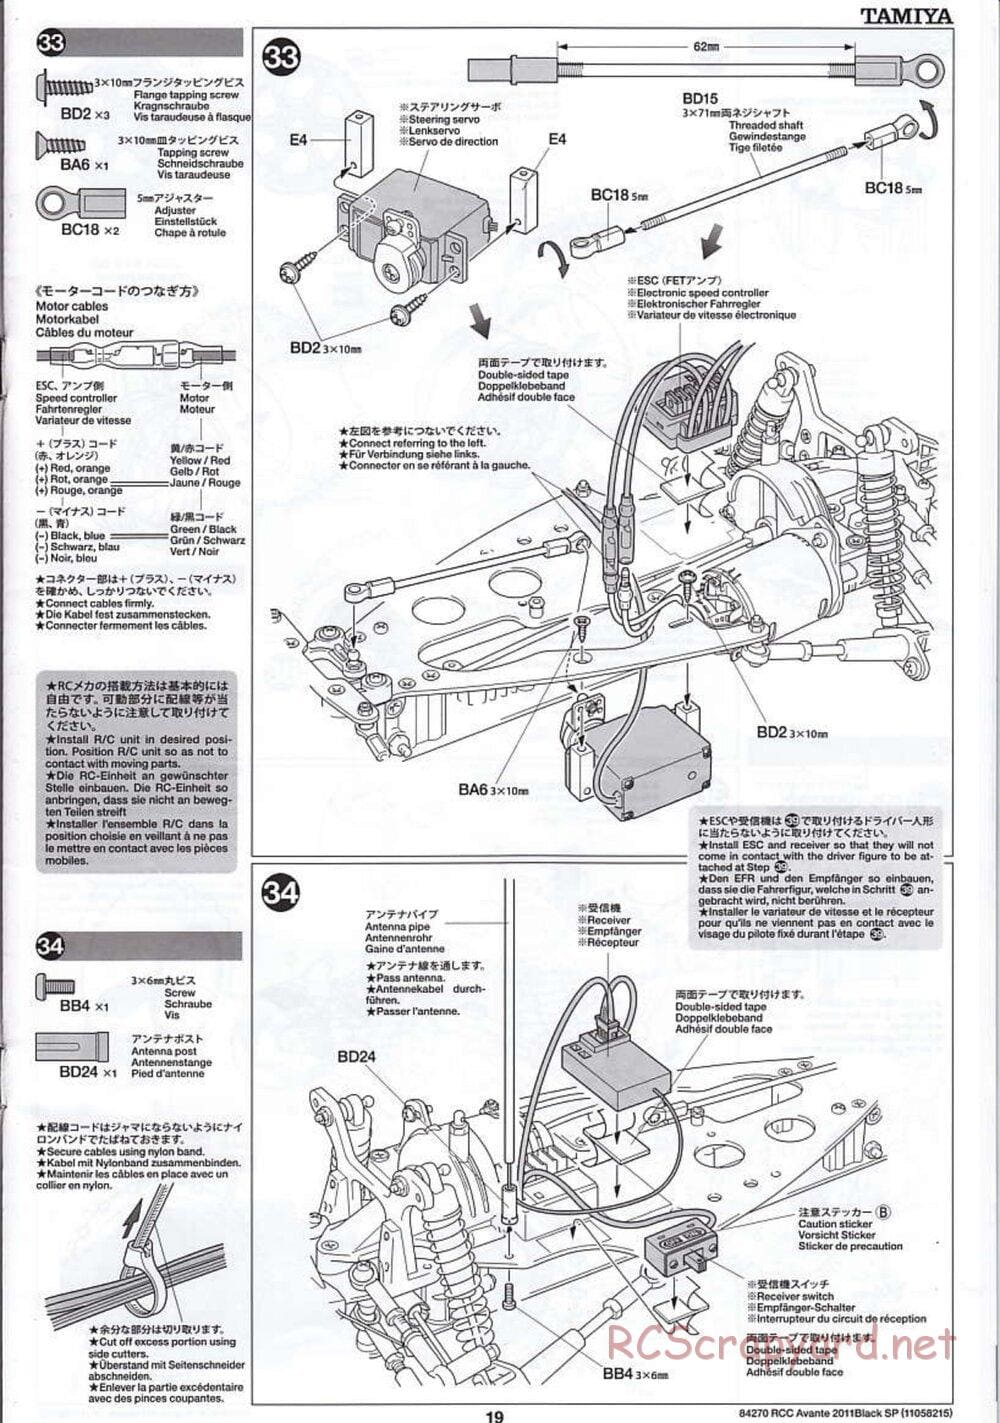 Tamiya - Avante 2011 - Black Special Chassis - Manual - Page 19